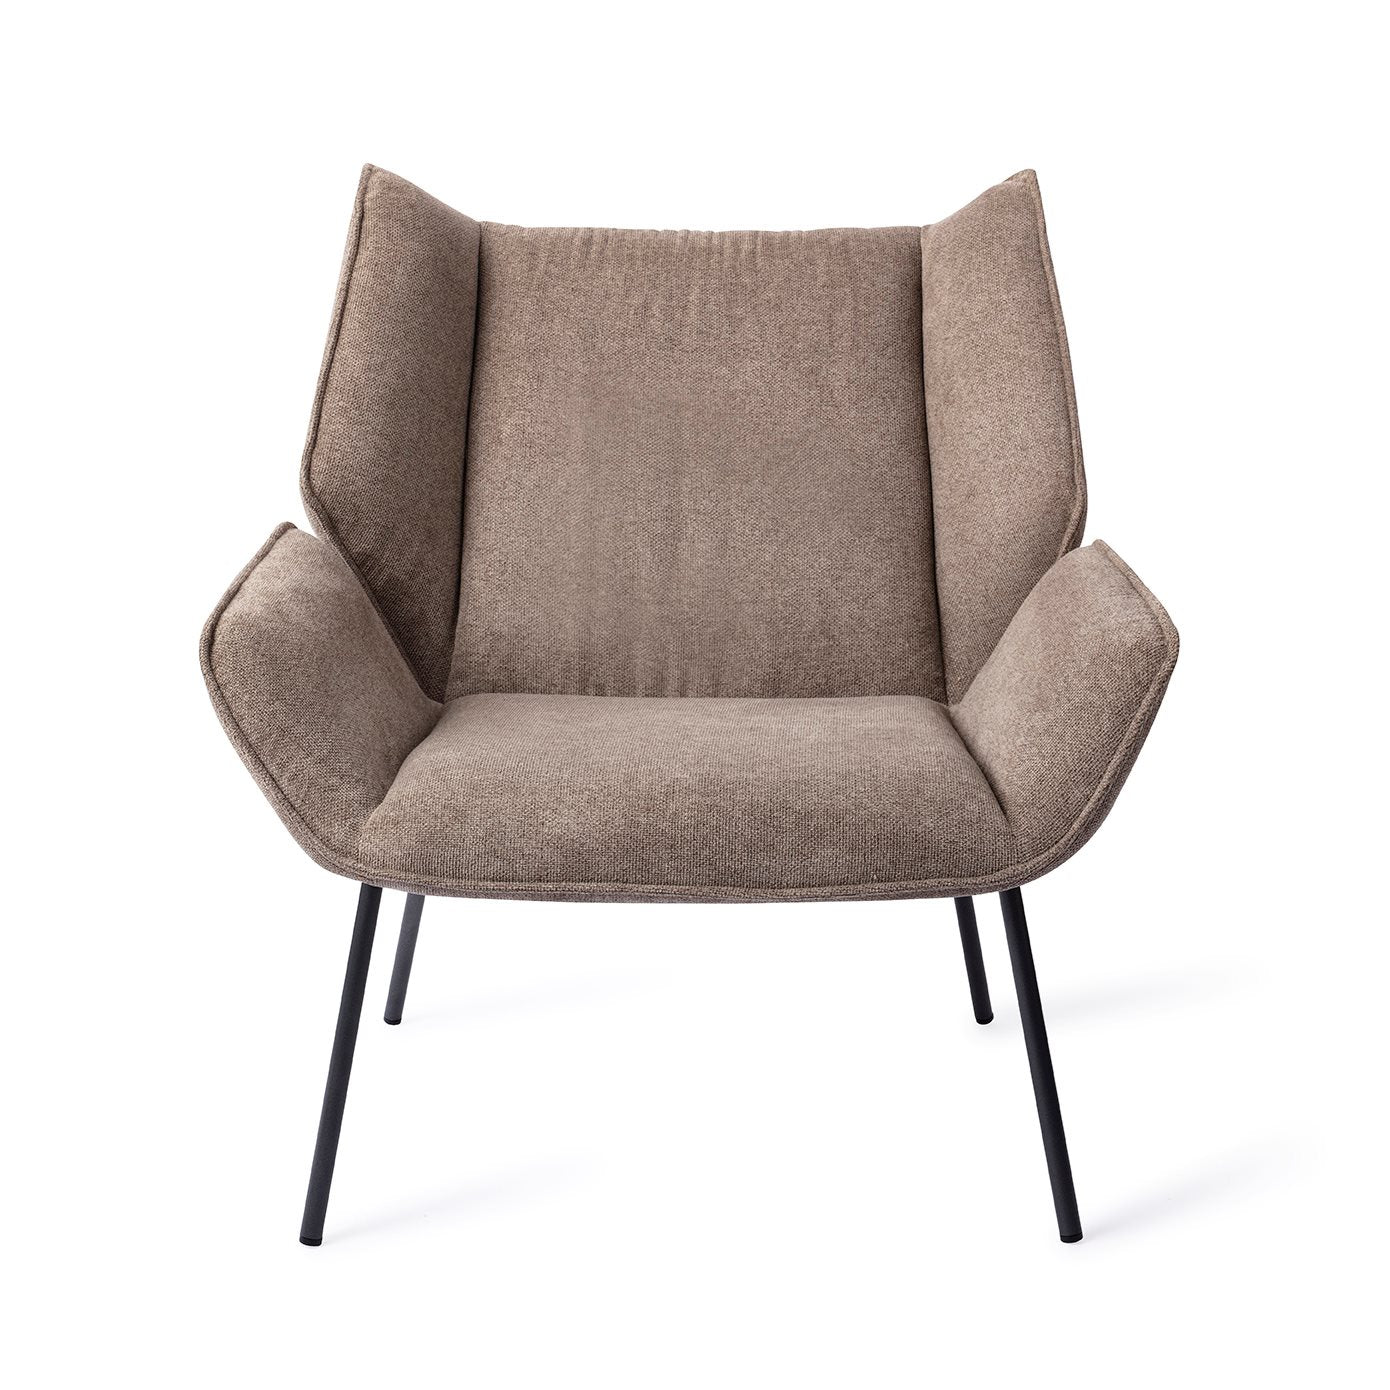 Haruno Accent Chair Taupy Toffee